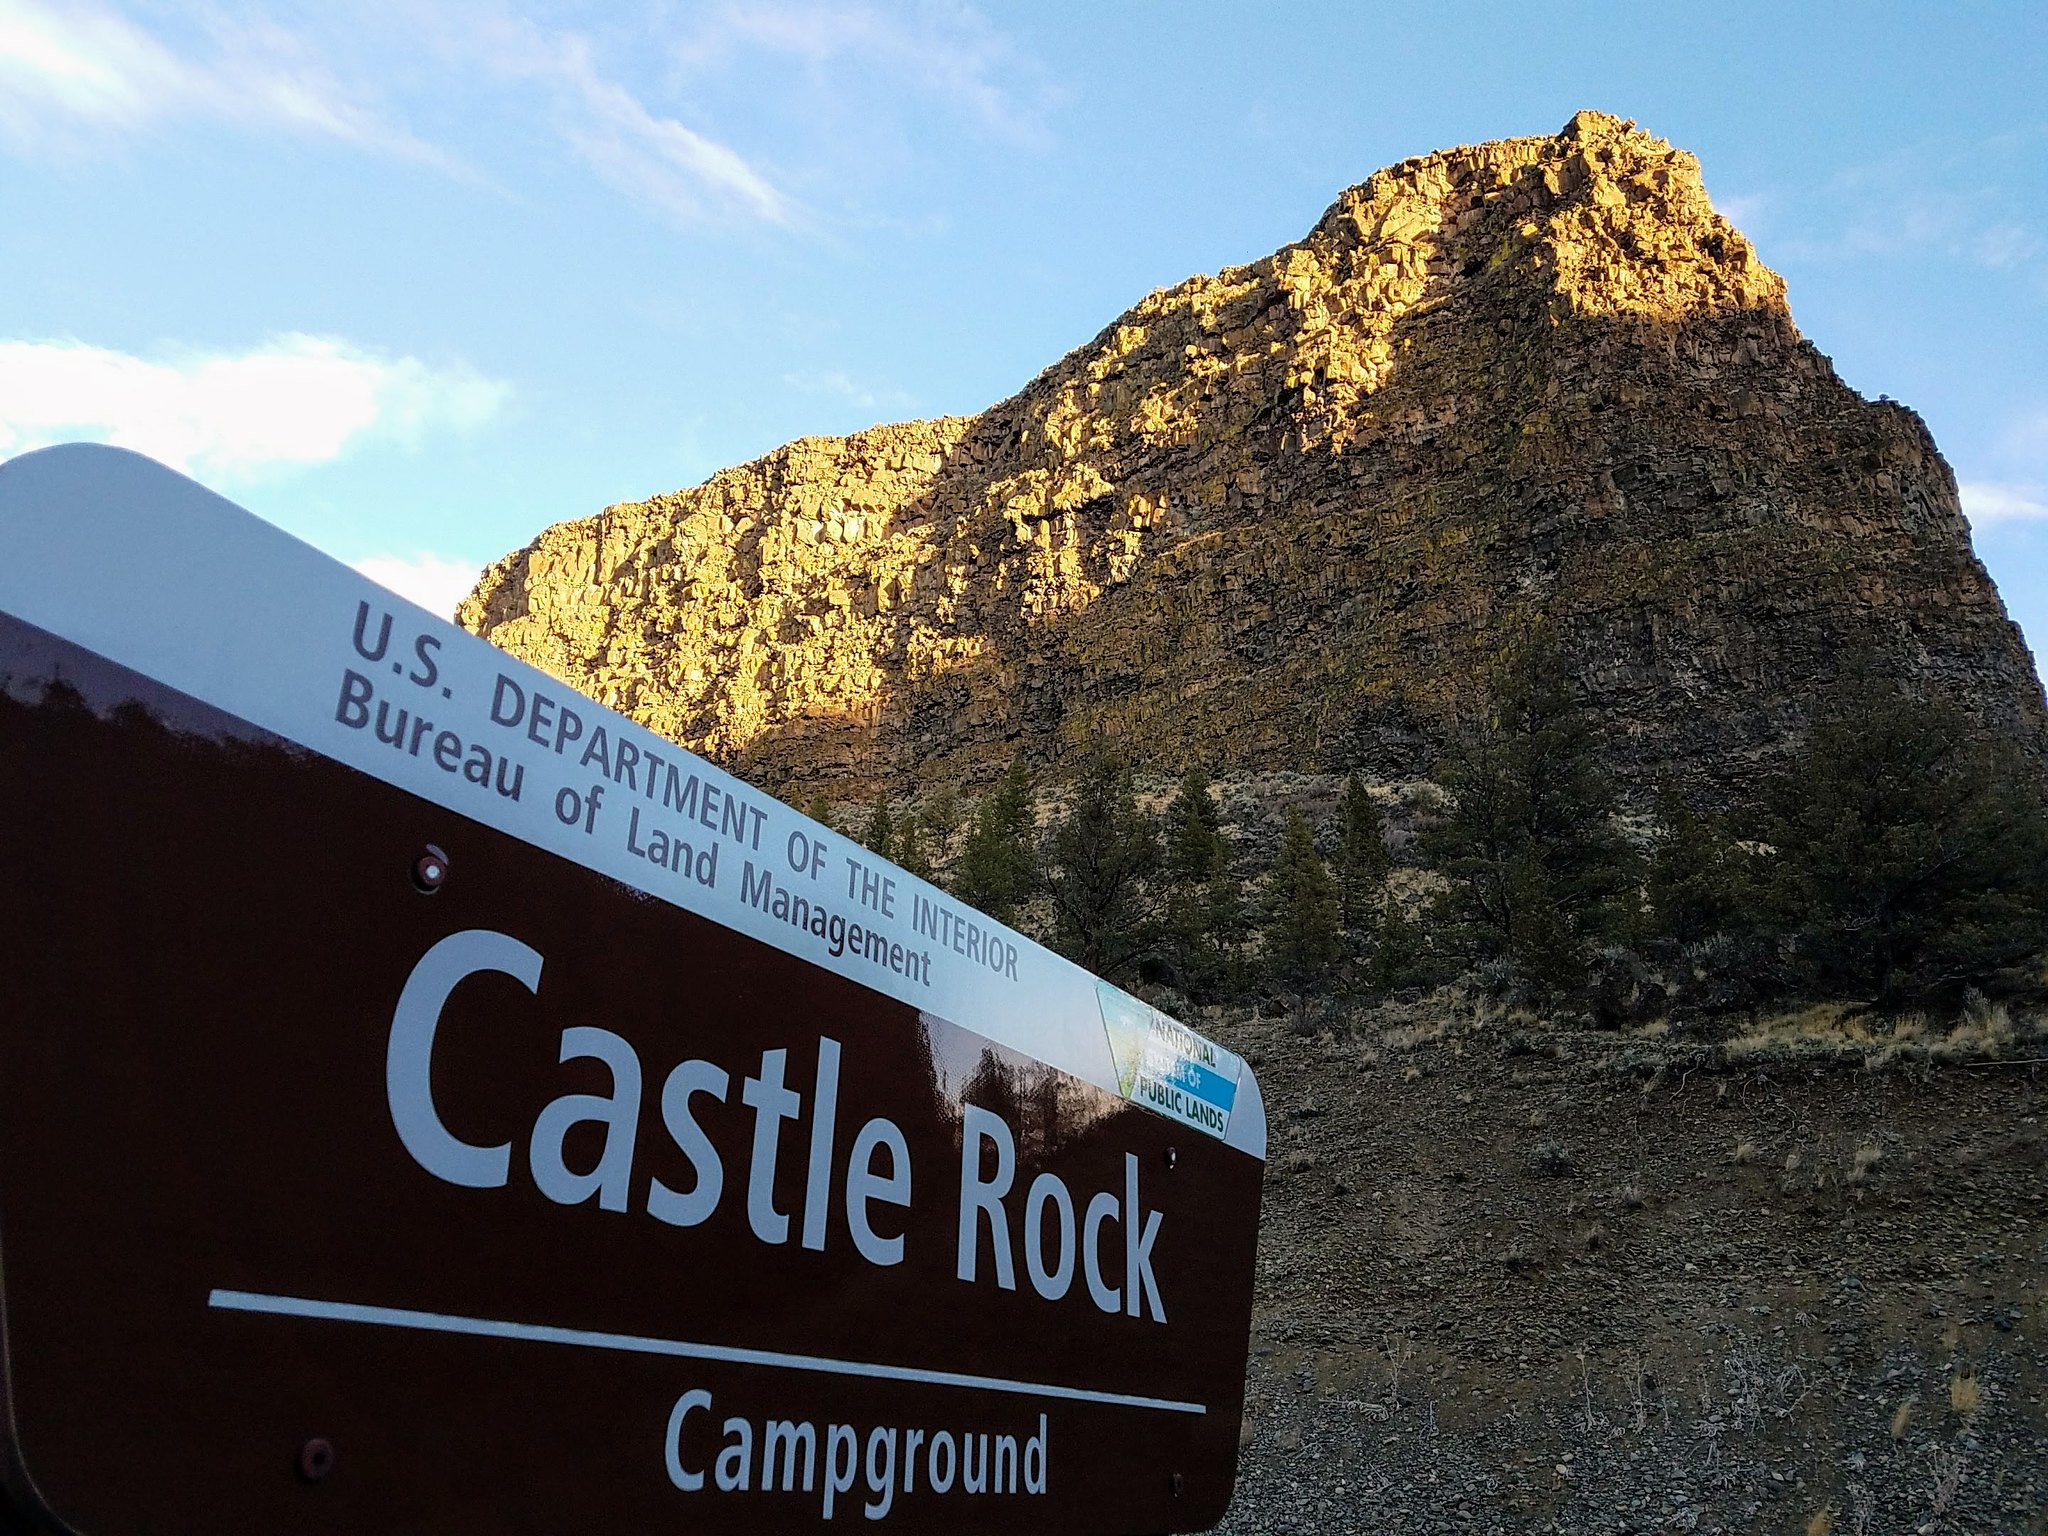 Castle Rock looming above its namesake campground.